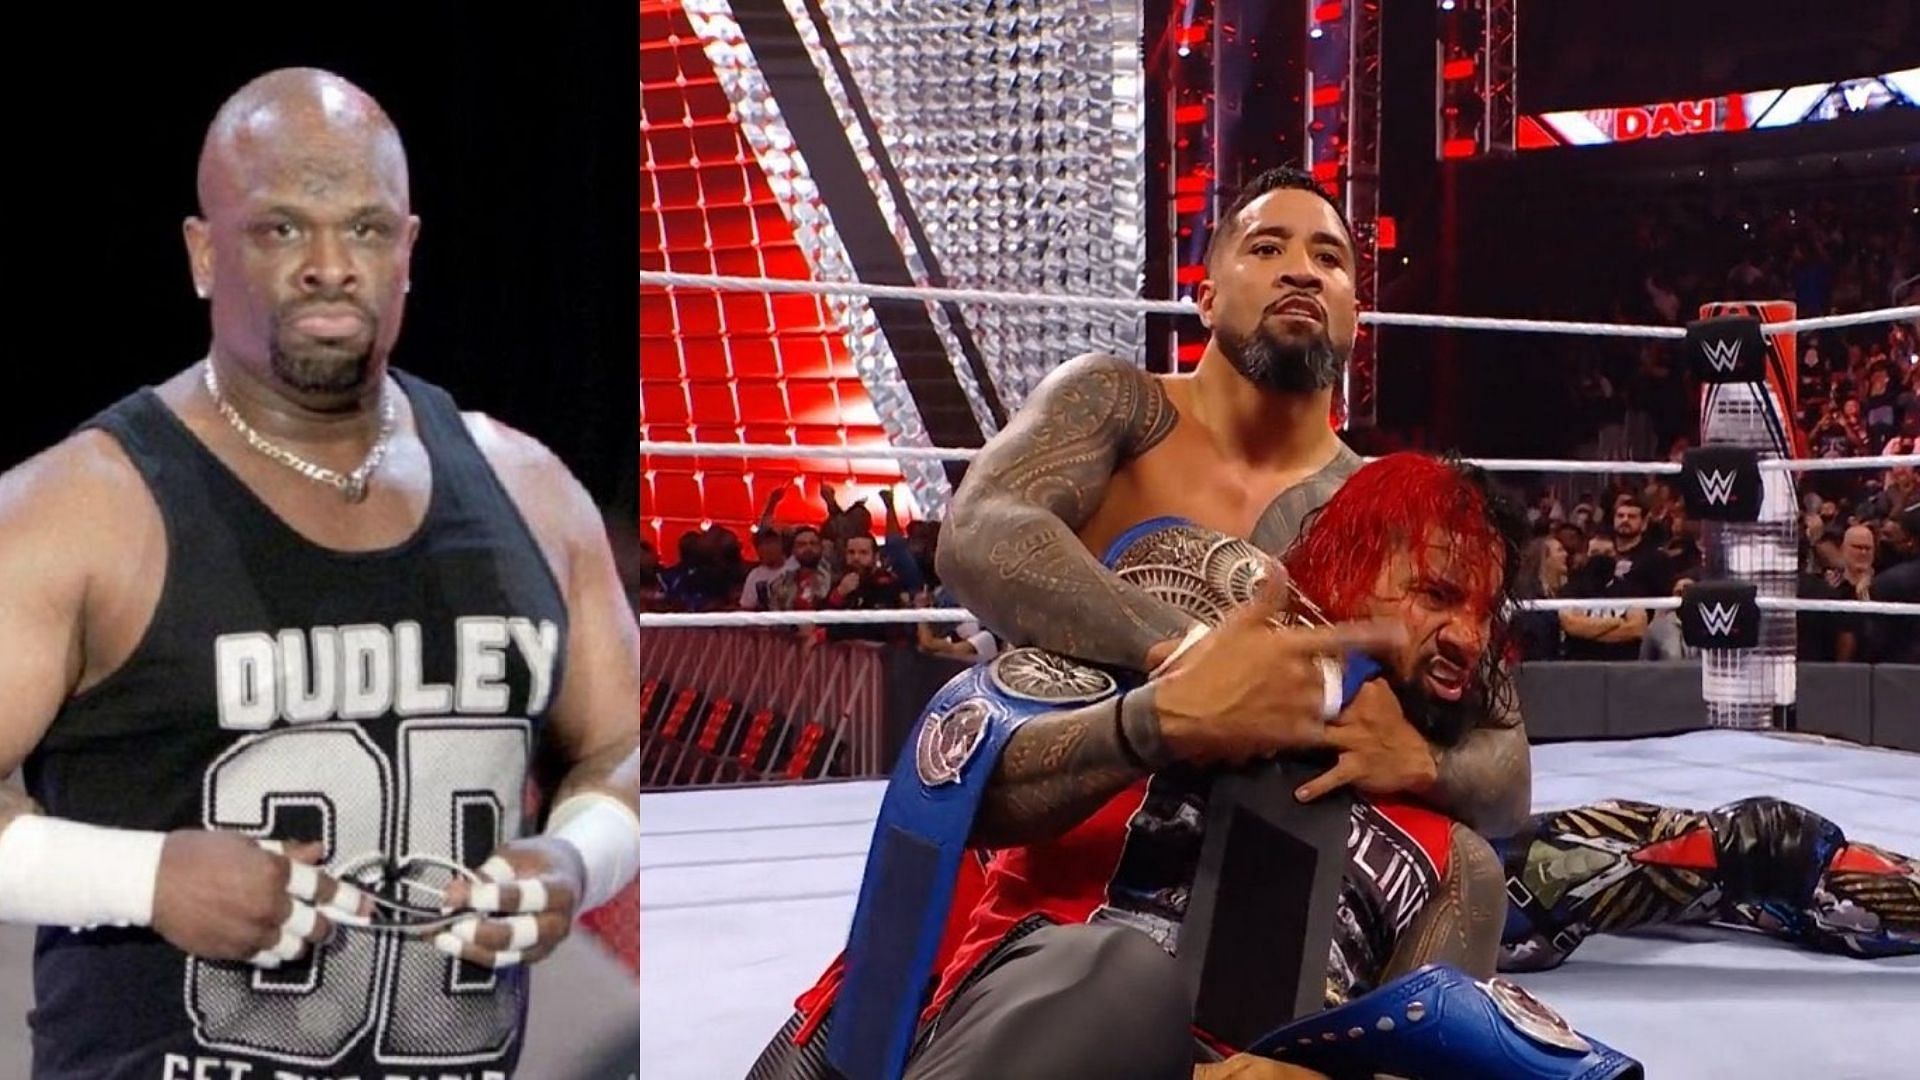 D-Von was full of praise for The Usos